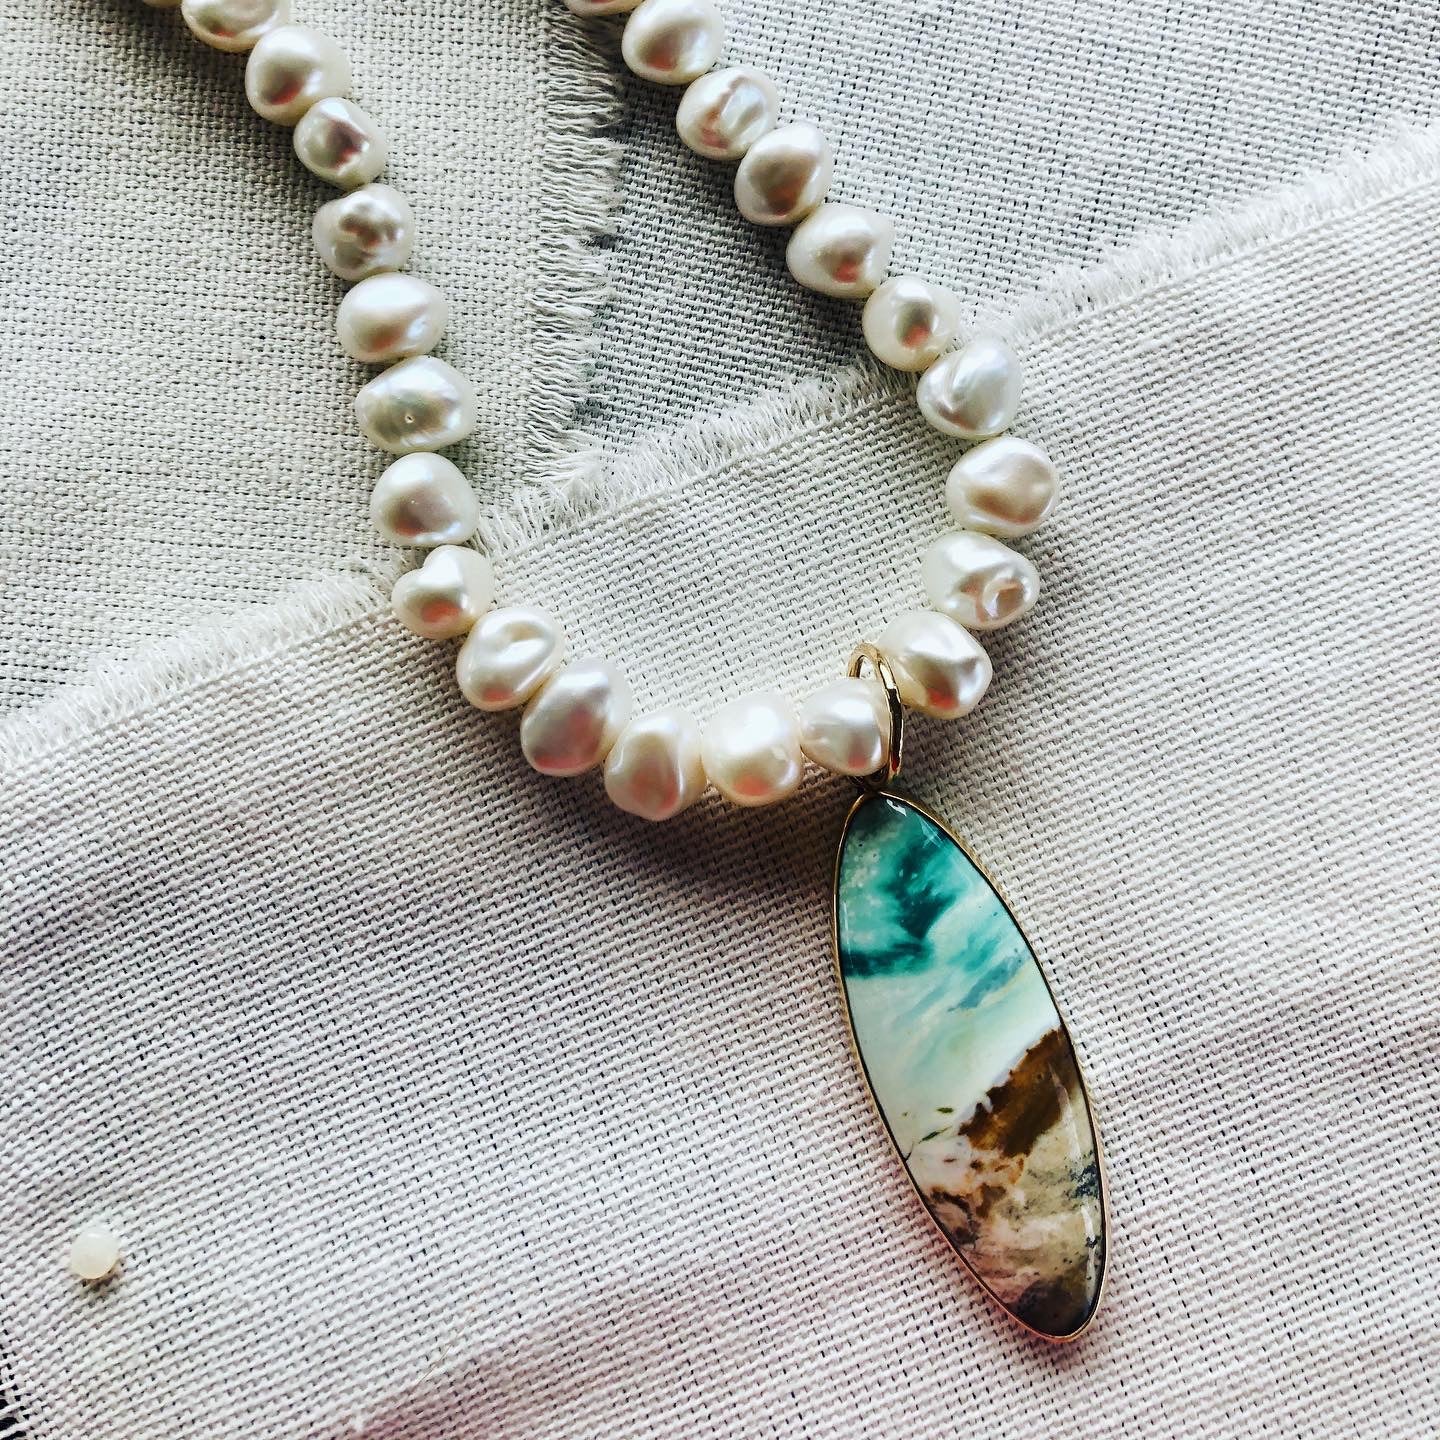 This stunning blue opalized fossilized Indonesian wood necklace reminds me of the ocean and beaches of Hawaii.  Blue opalized wood has recently been discovered and makes for gorgeous one of a kind resort jewelry.